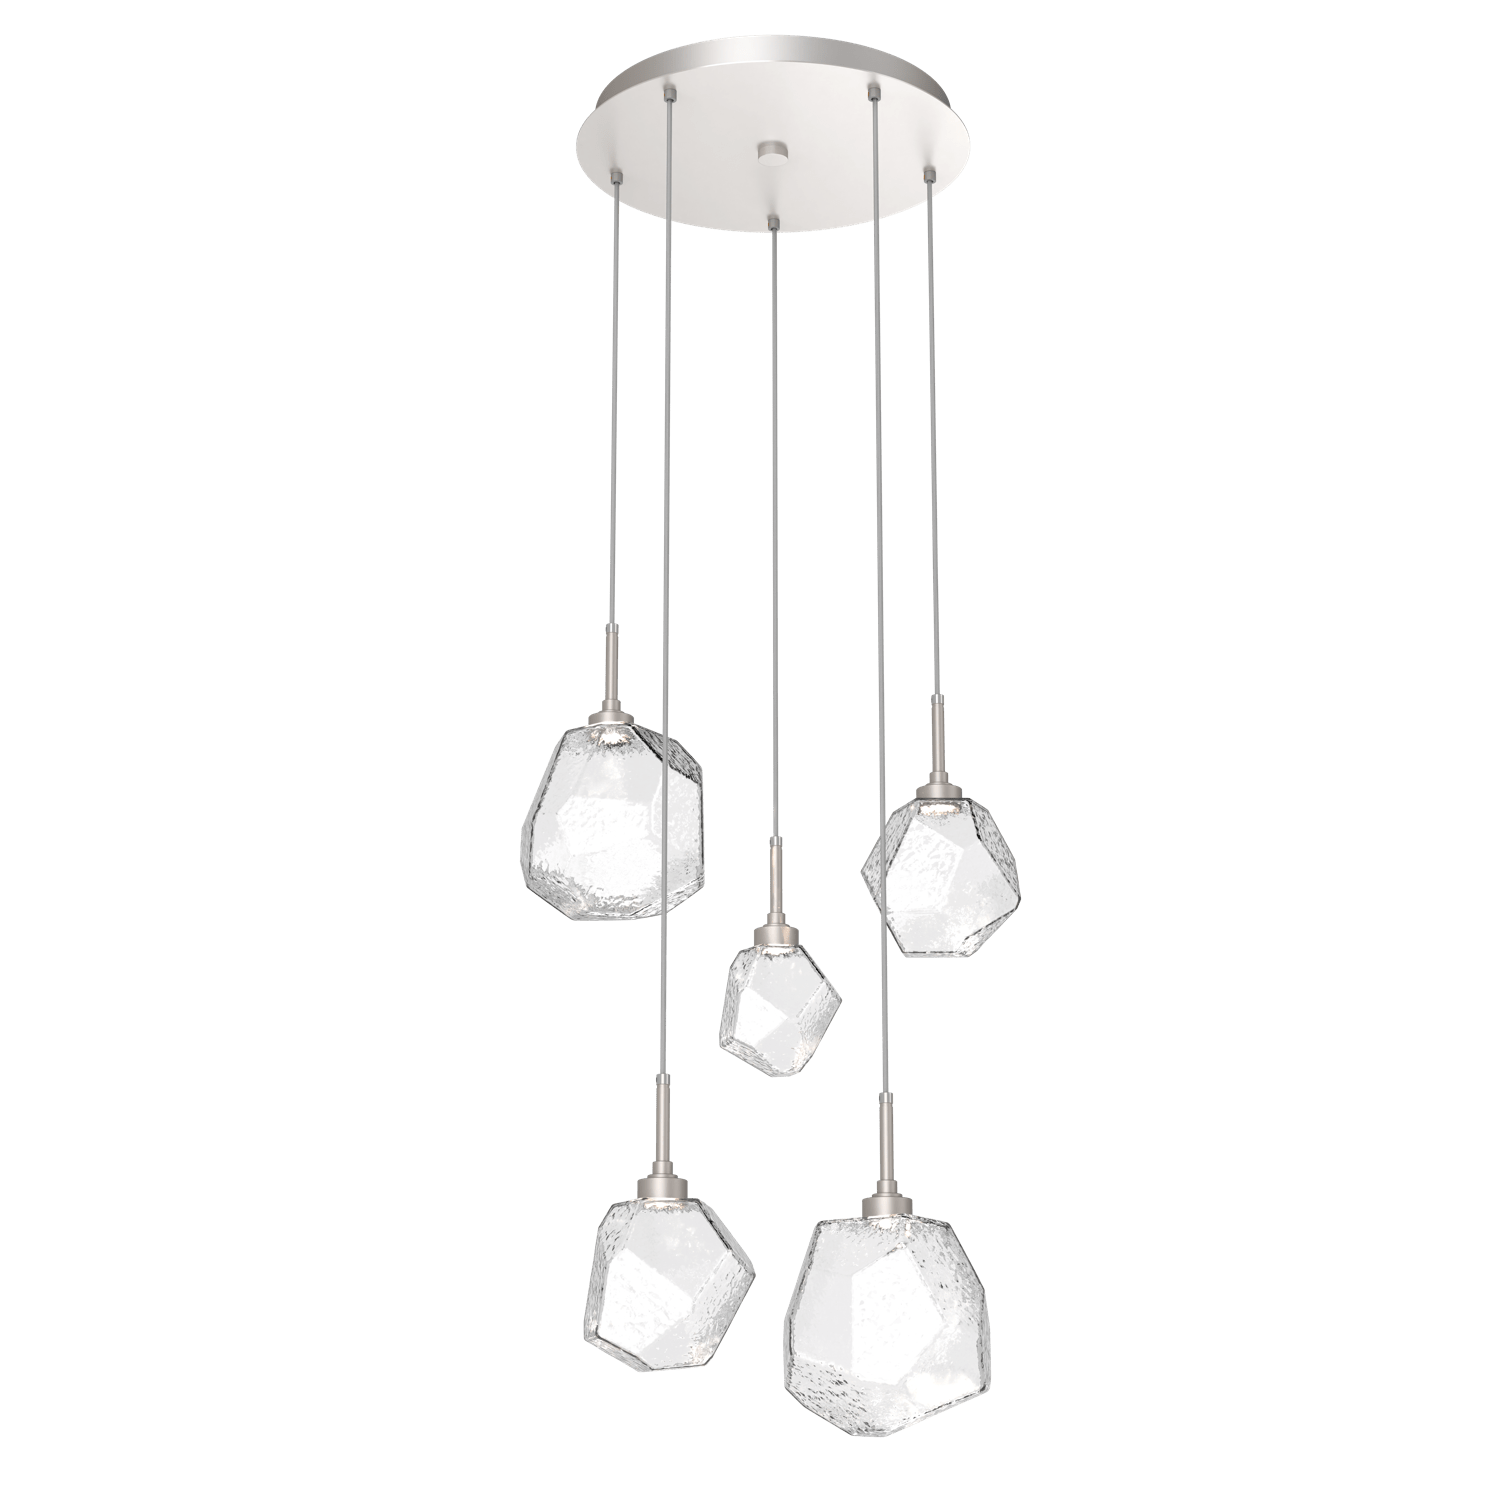 CHB0039-05-BS-C-Hammerton-Studio-Gem-5-light-round-pendant-chandelier-with-metallic-beige-silver-finish-and-clear-blown-glass-shades-and-LED-lamping